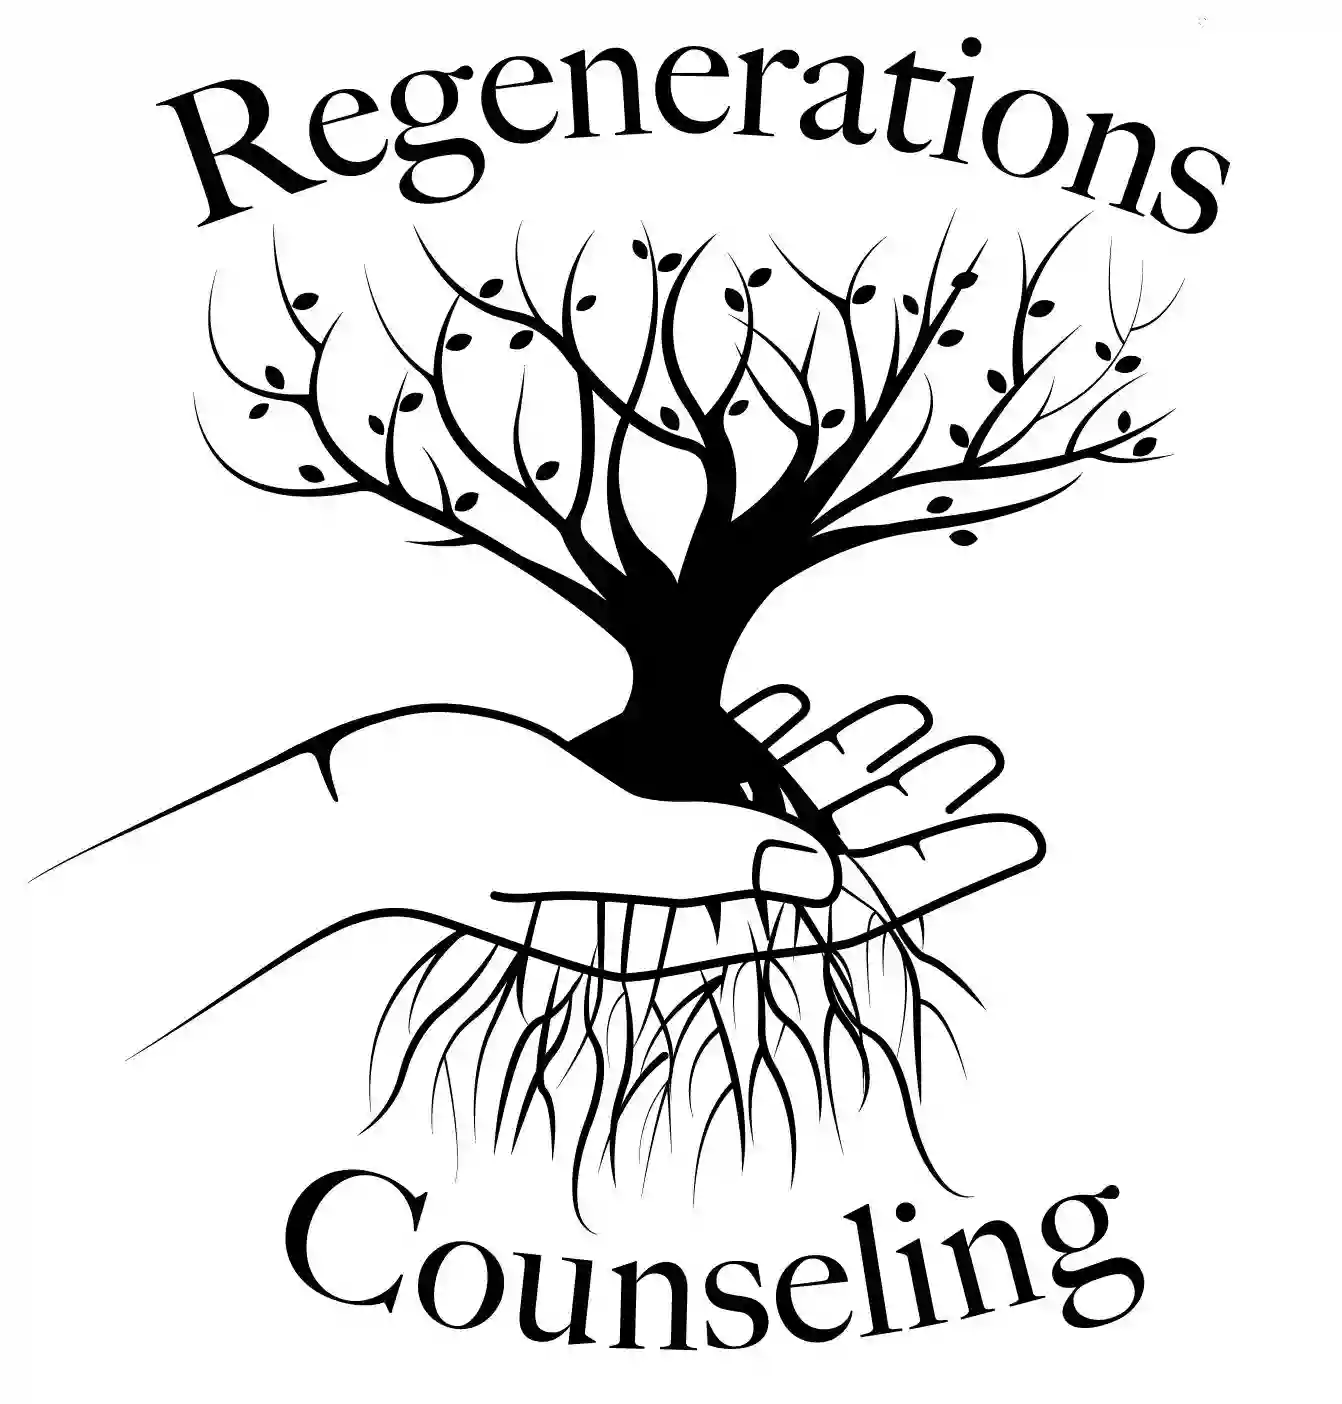 Regenerations Counseling